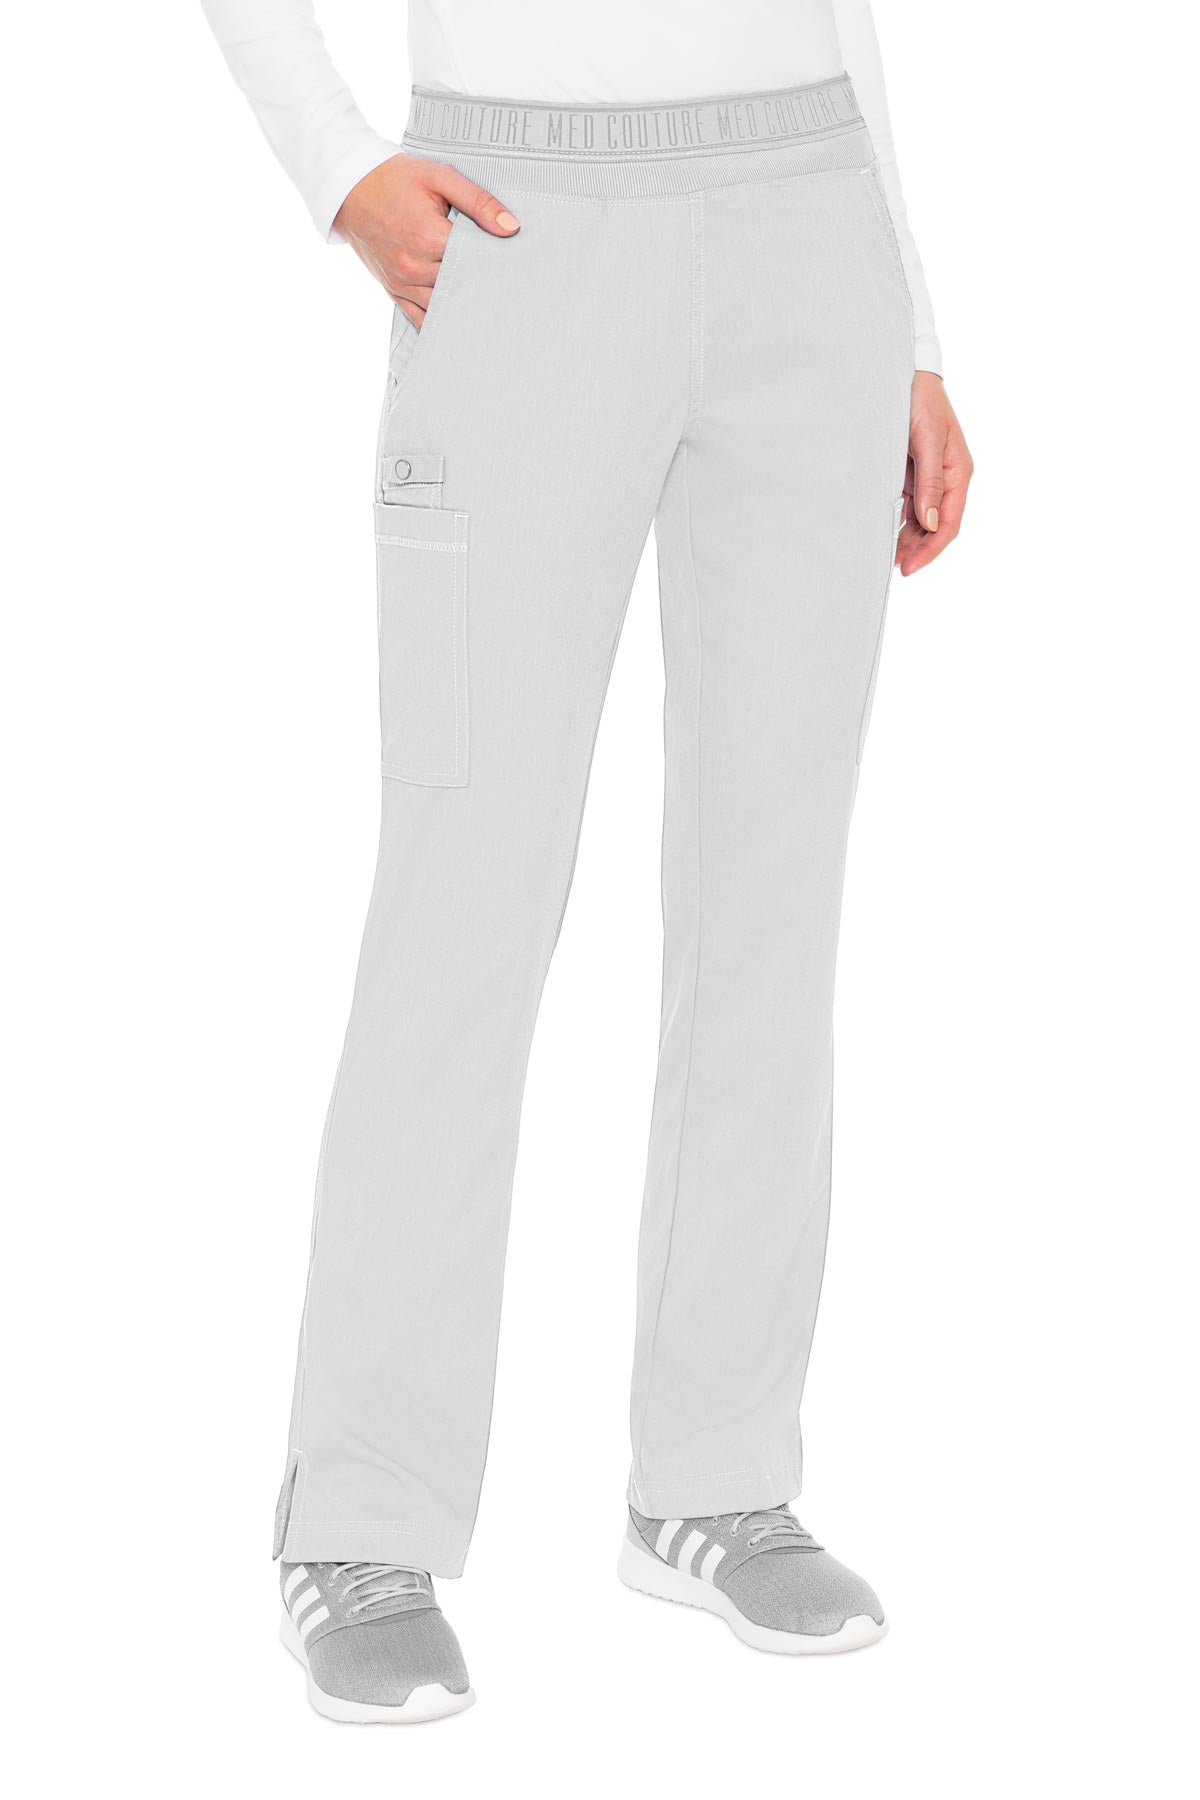 MED COUTURE Yoga 2 Cargo Pocket Pant PETITE